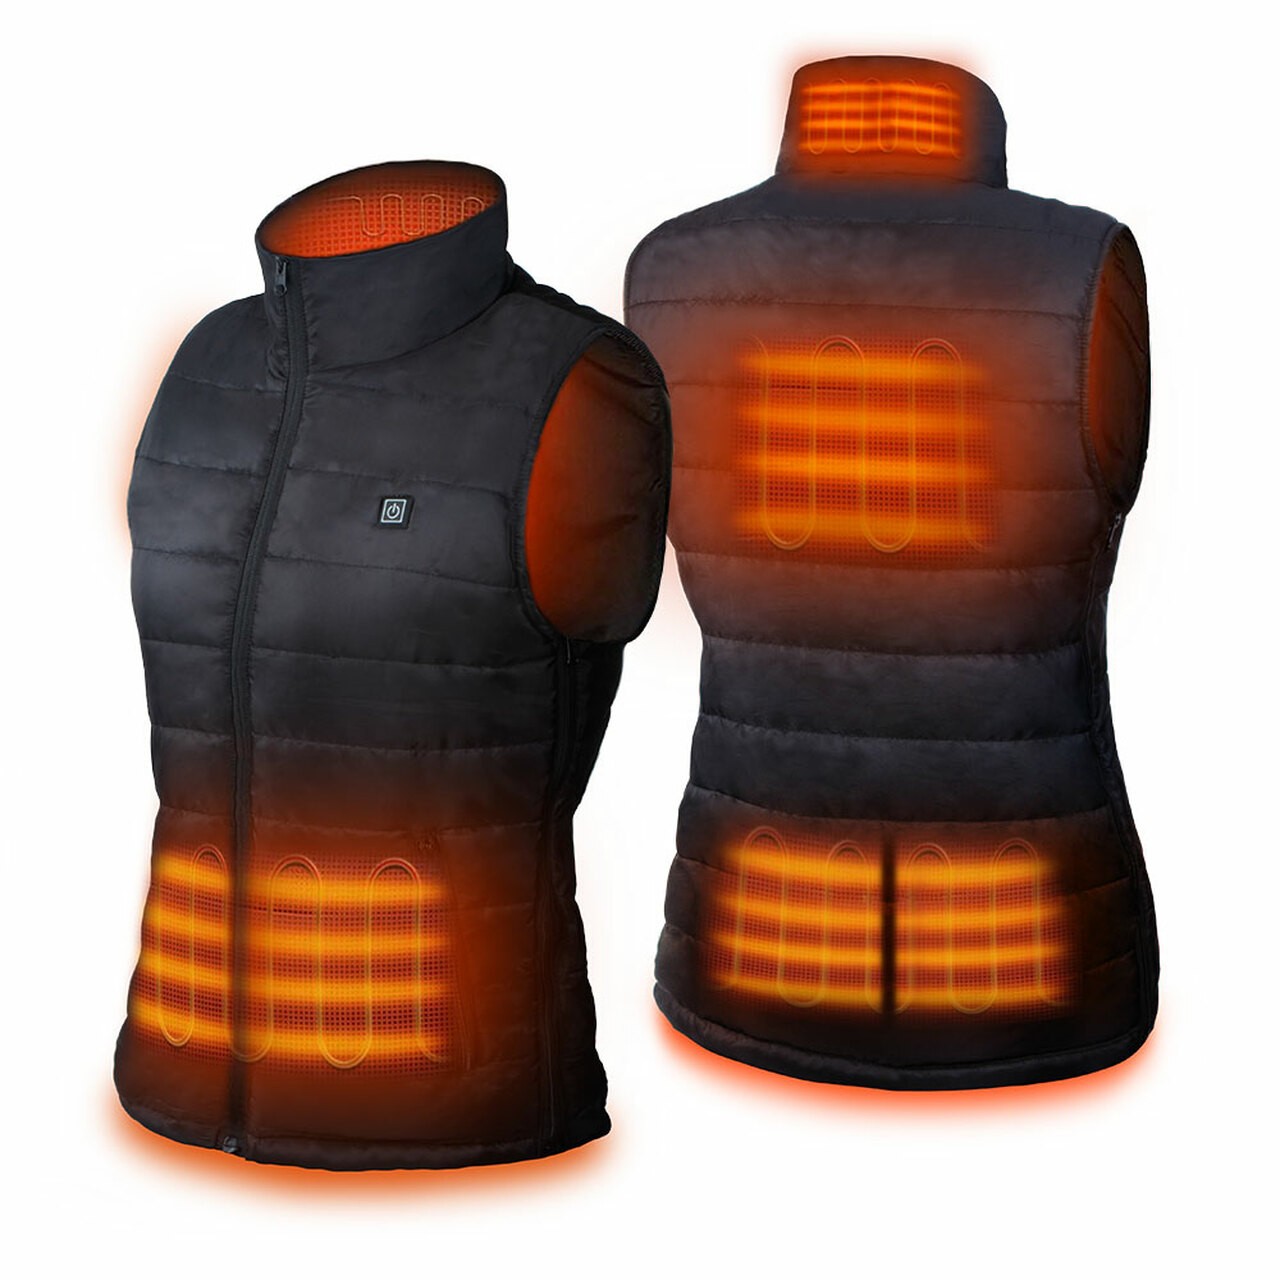 7 Heating Zones Adjustable Size for Hiking Heating Clothing Vest USB Charging Electric Body Warmer Gilet with 3 Temperature Battery Not Included Unisex Heated Vest